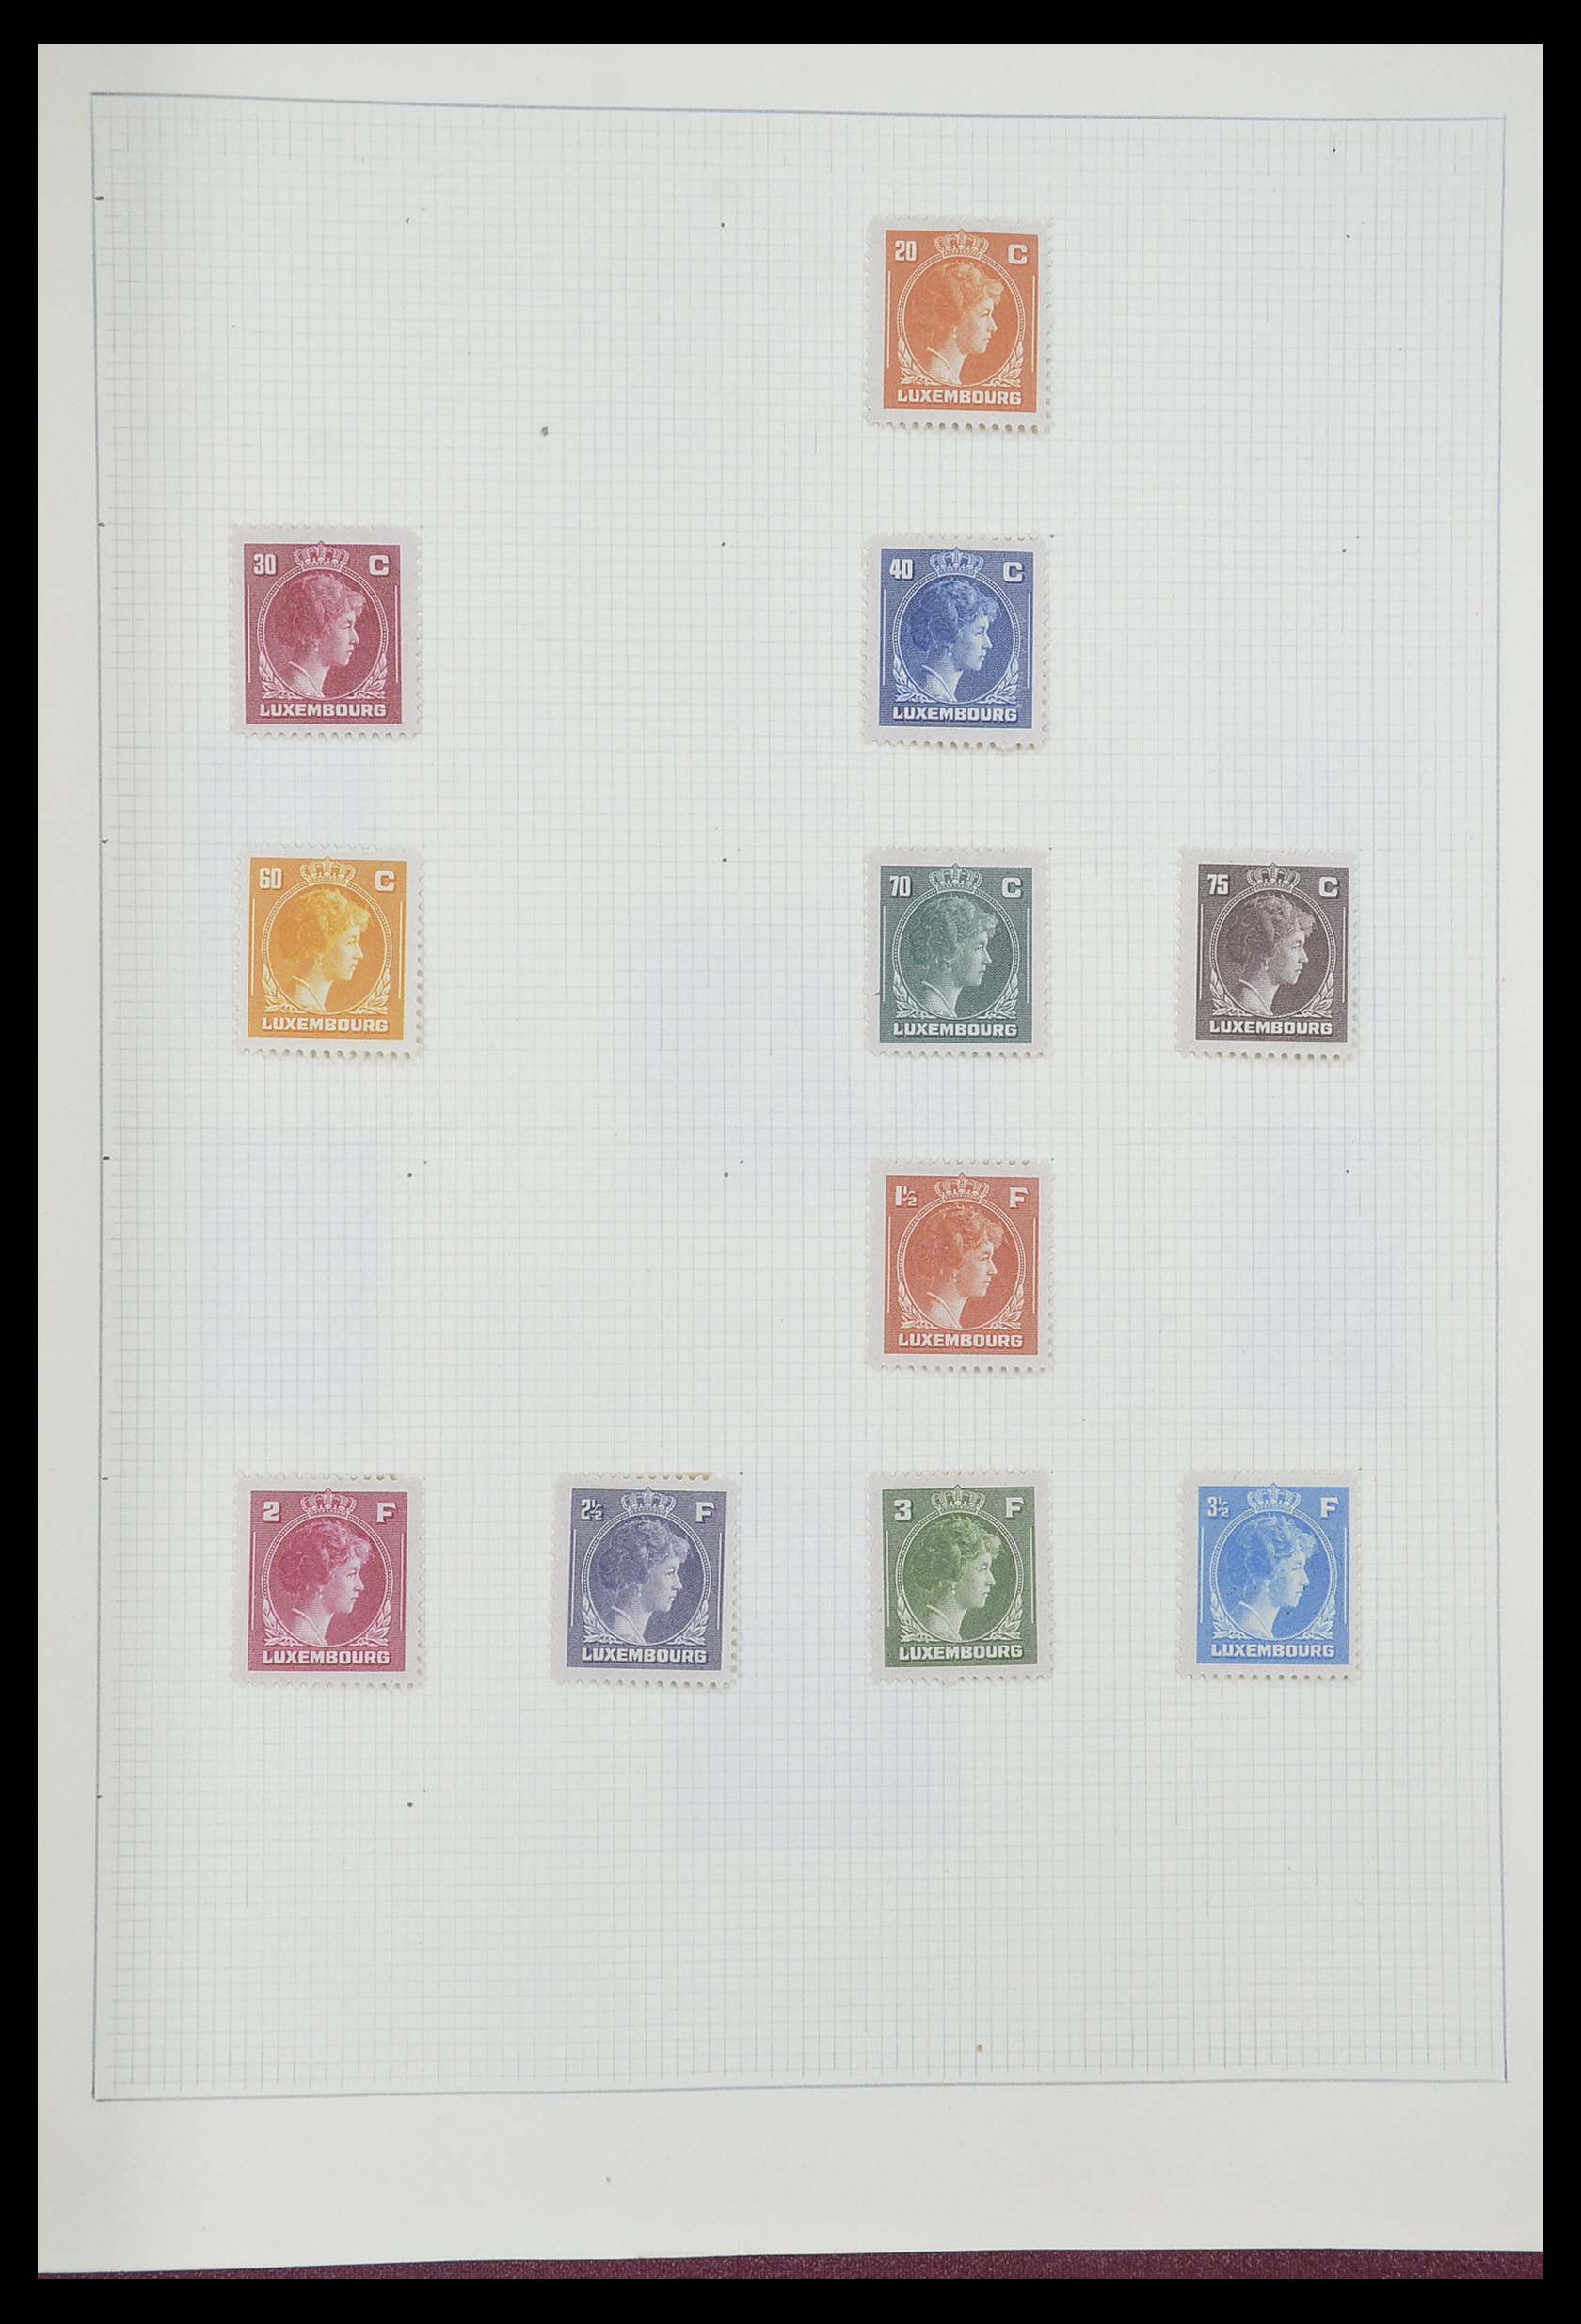 33406 205 - Stamp collection 33406 European countries 1938-1955.